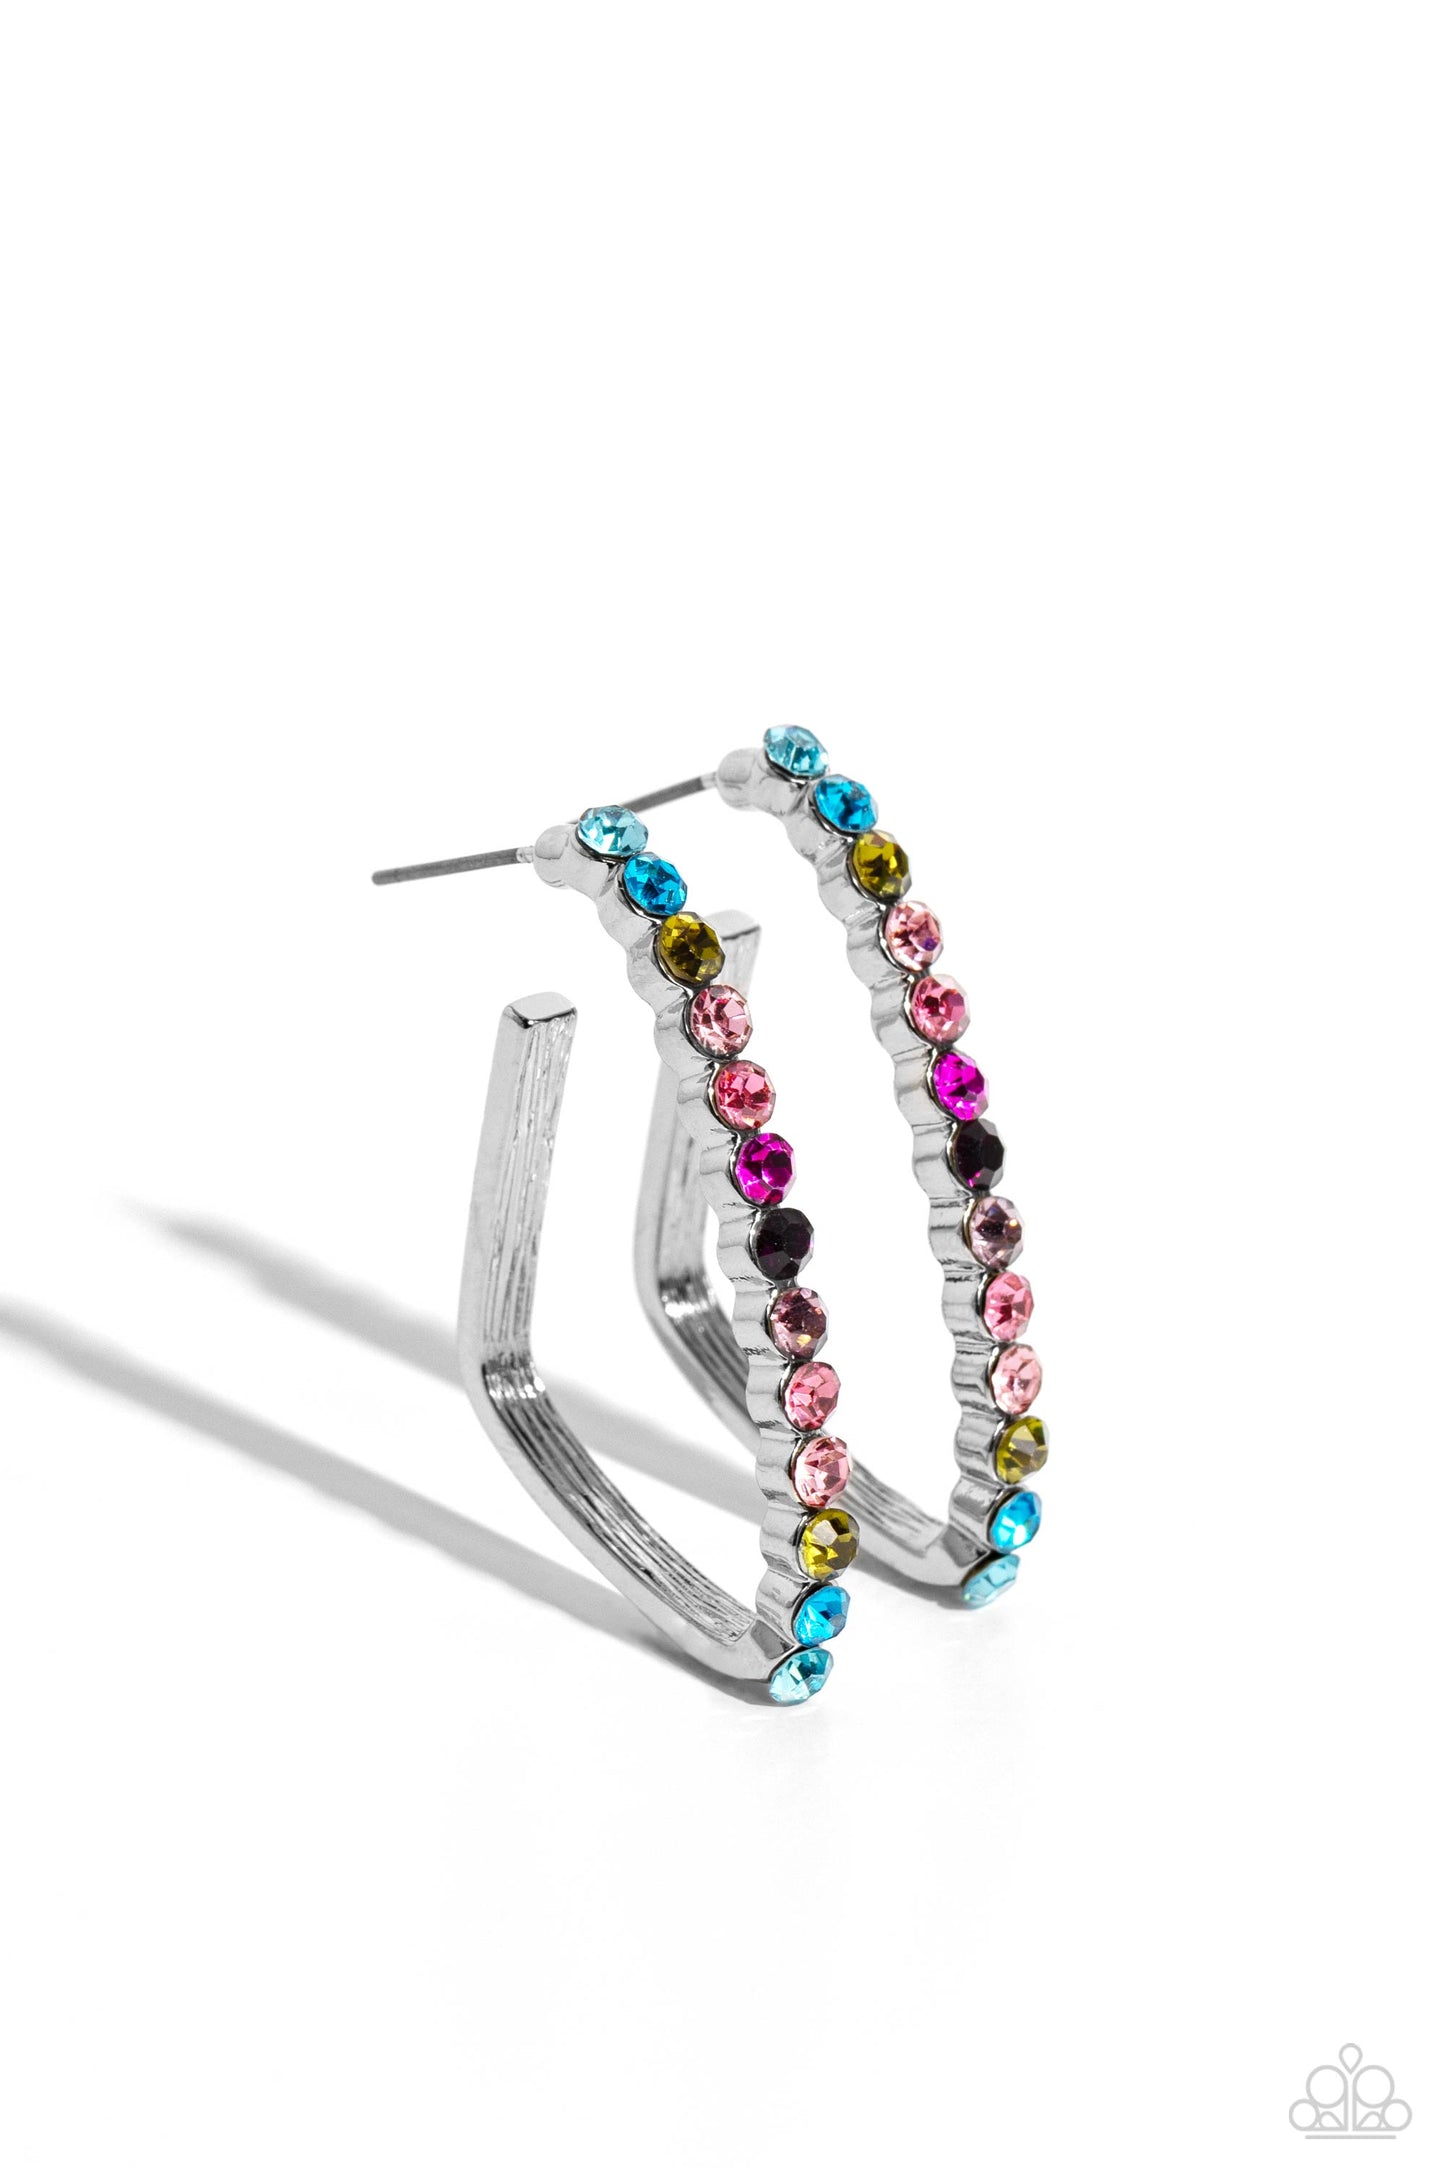 Paparazzi Accessories - Triangular Tapestry - Multi Hoop Earrings the front of a bold silver hoop is encrusted in multicolored rhinestones, creating a sparkly spectrum of color. The multicolored scalloped frame leisurely bends into an airy triangular frame for a geometric motif. Earring attaches to a standard post fitting. Hoop measures approximately 1/2" in diameter.  Sold as one pair of hoop earrings.